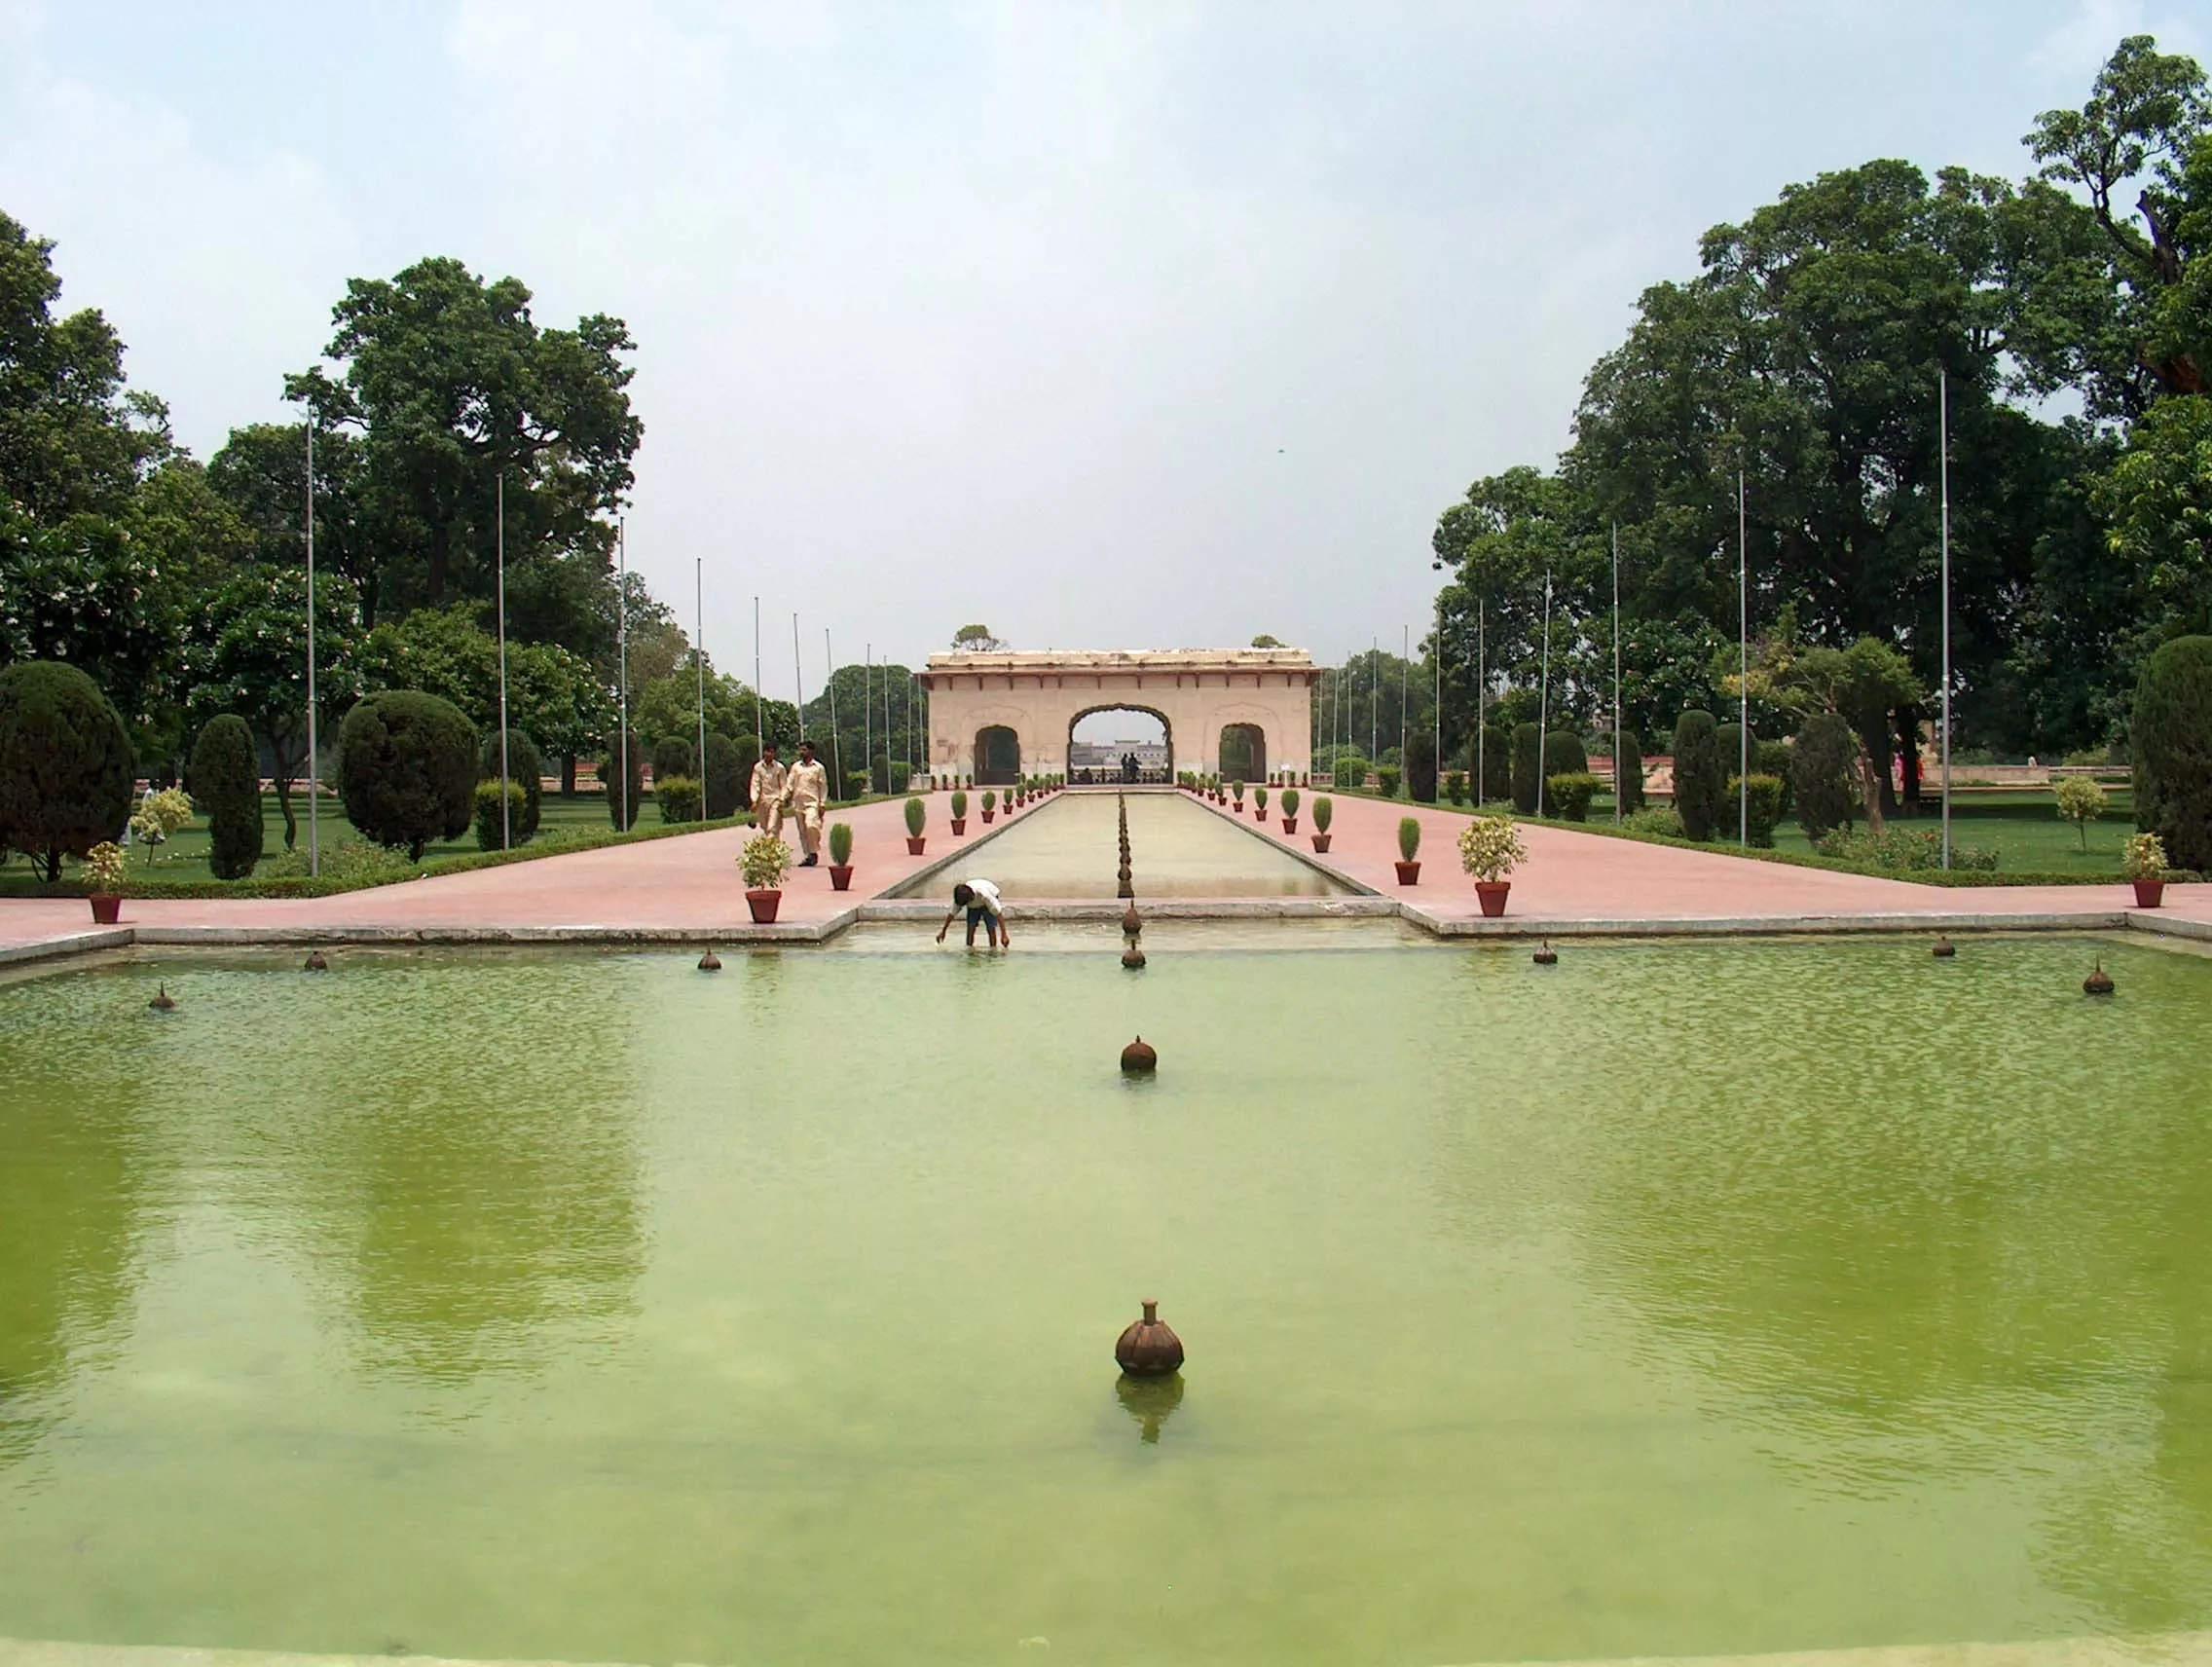 Shalimar Bagh in Pakistan, South Asia | Architecture,Gardens - Rated 4.7